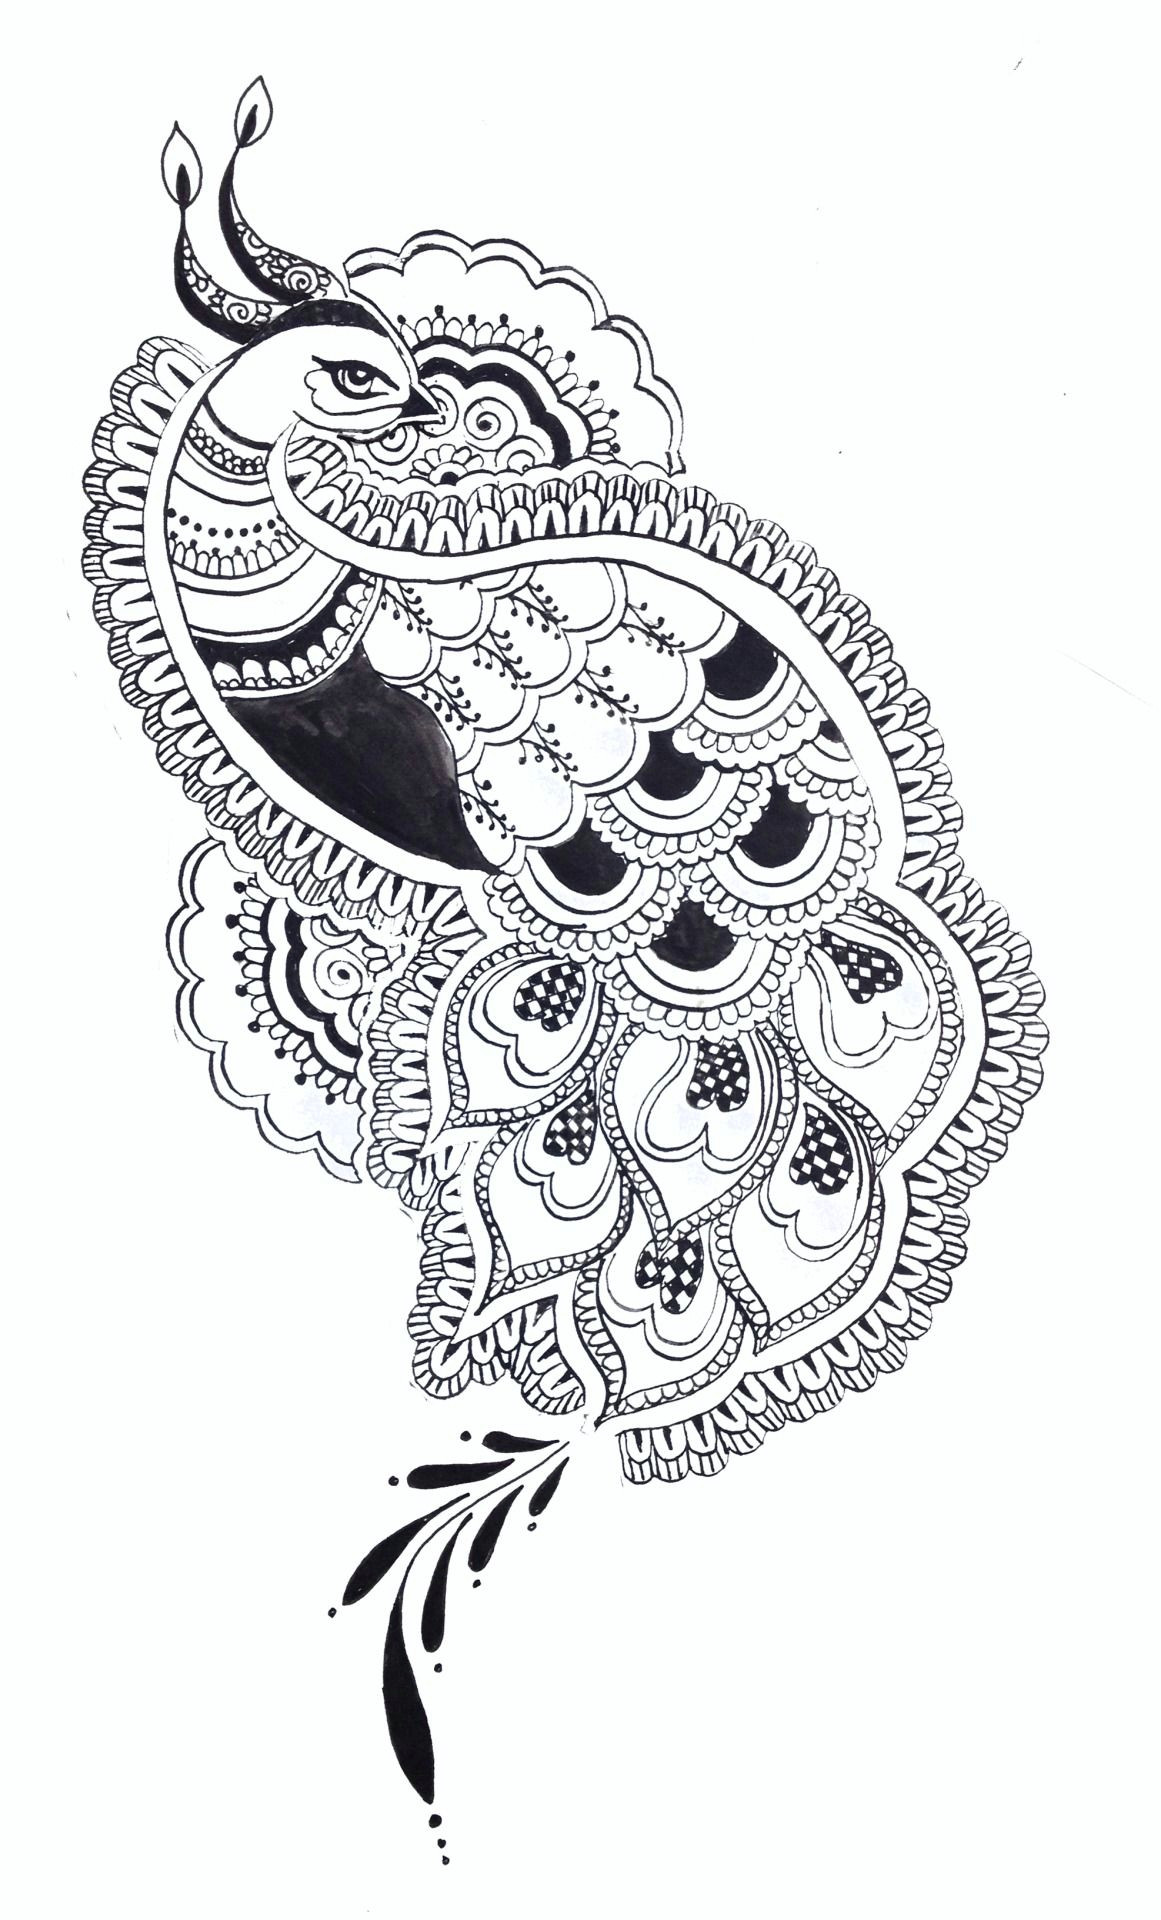 Drawing Ideas Peacock Black and White Peacock Design Google Search Indian Patterns